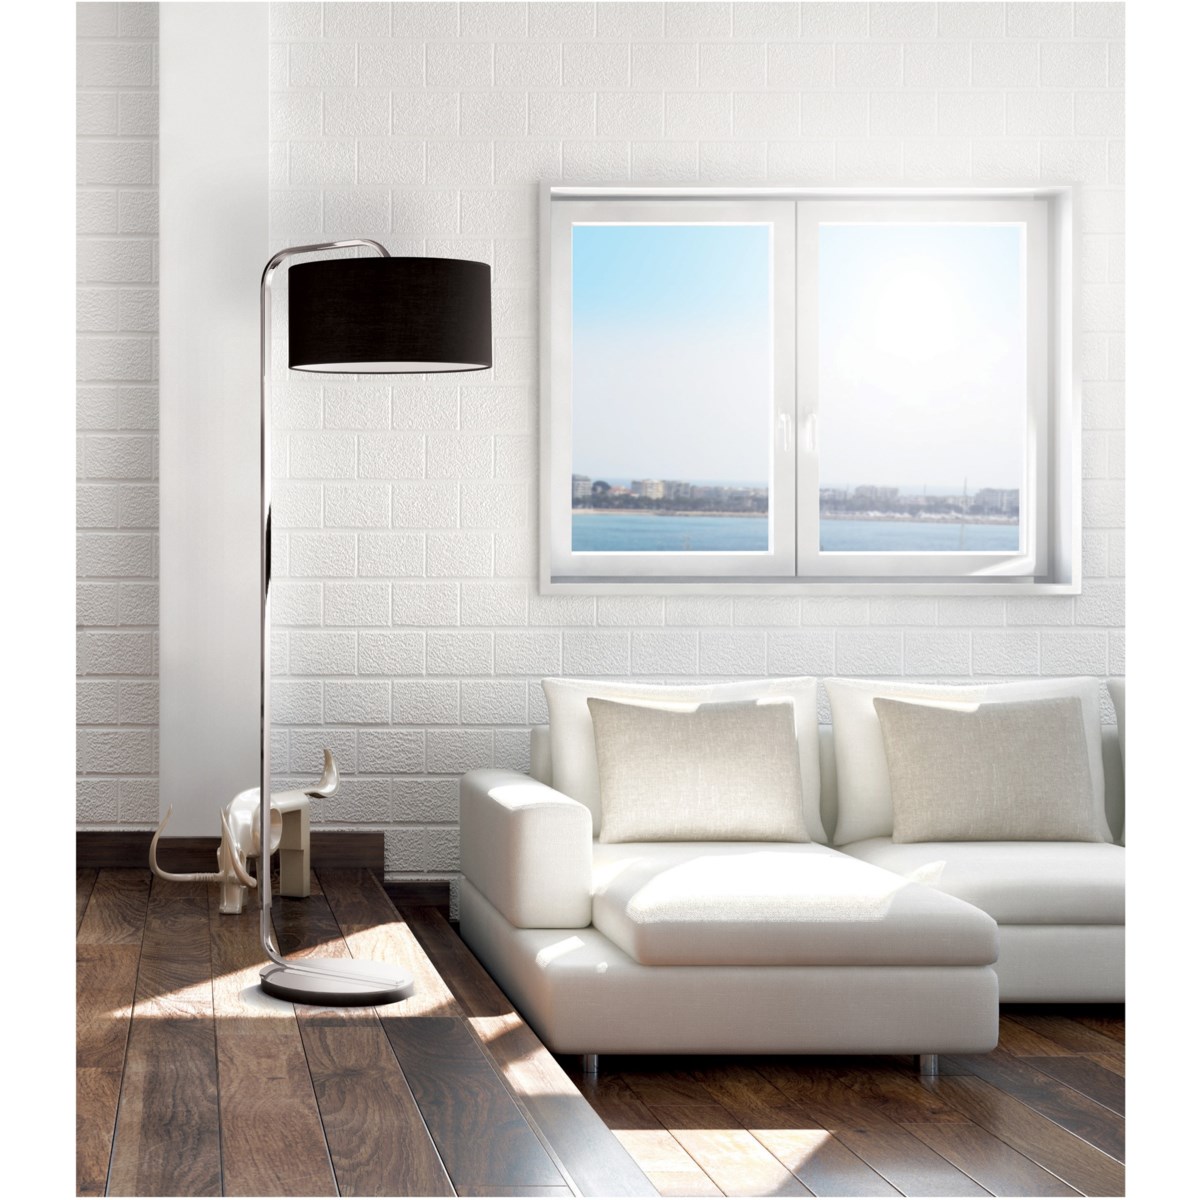 Cannes Floor Lamp in Chrome with Black Shade